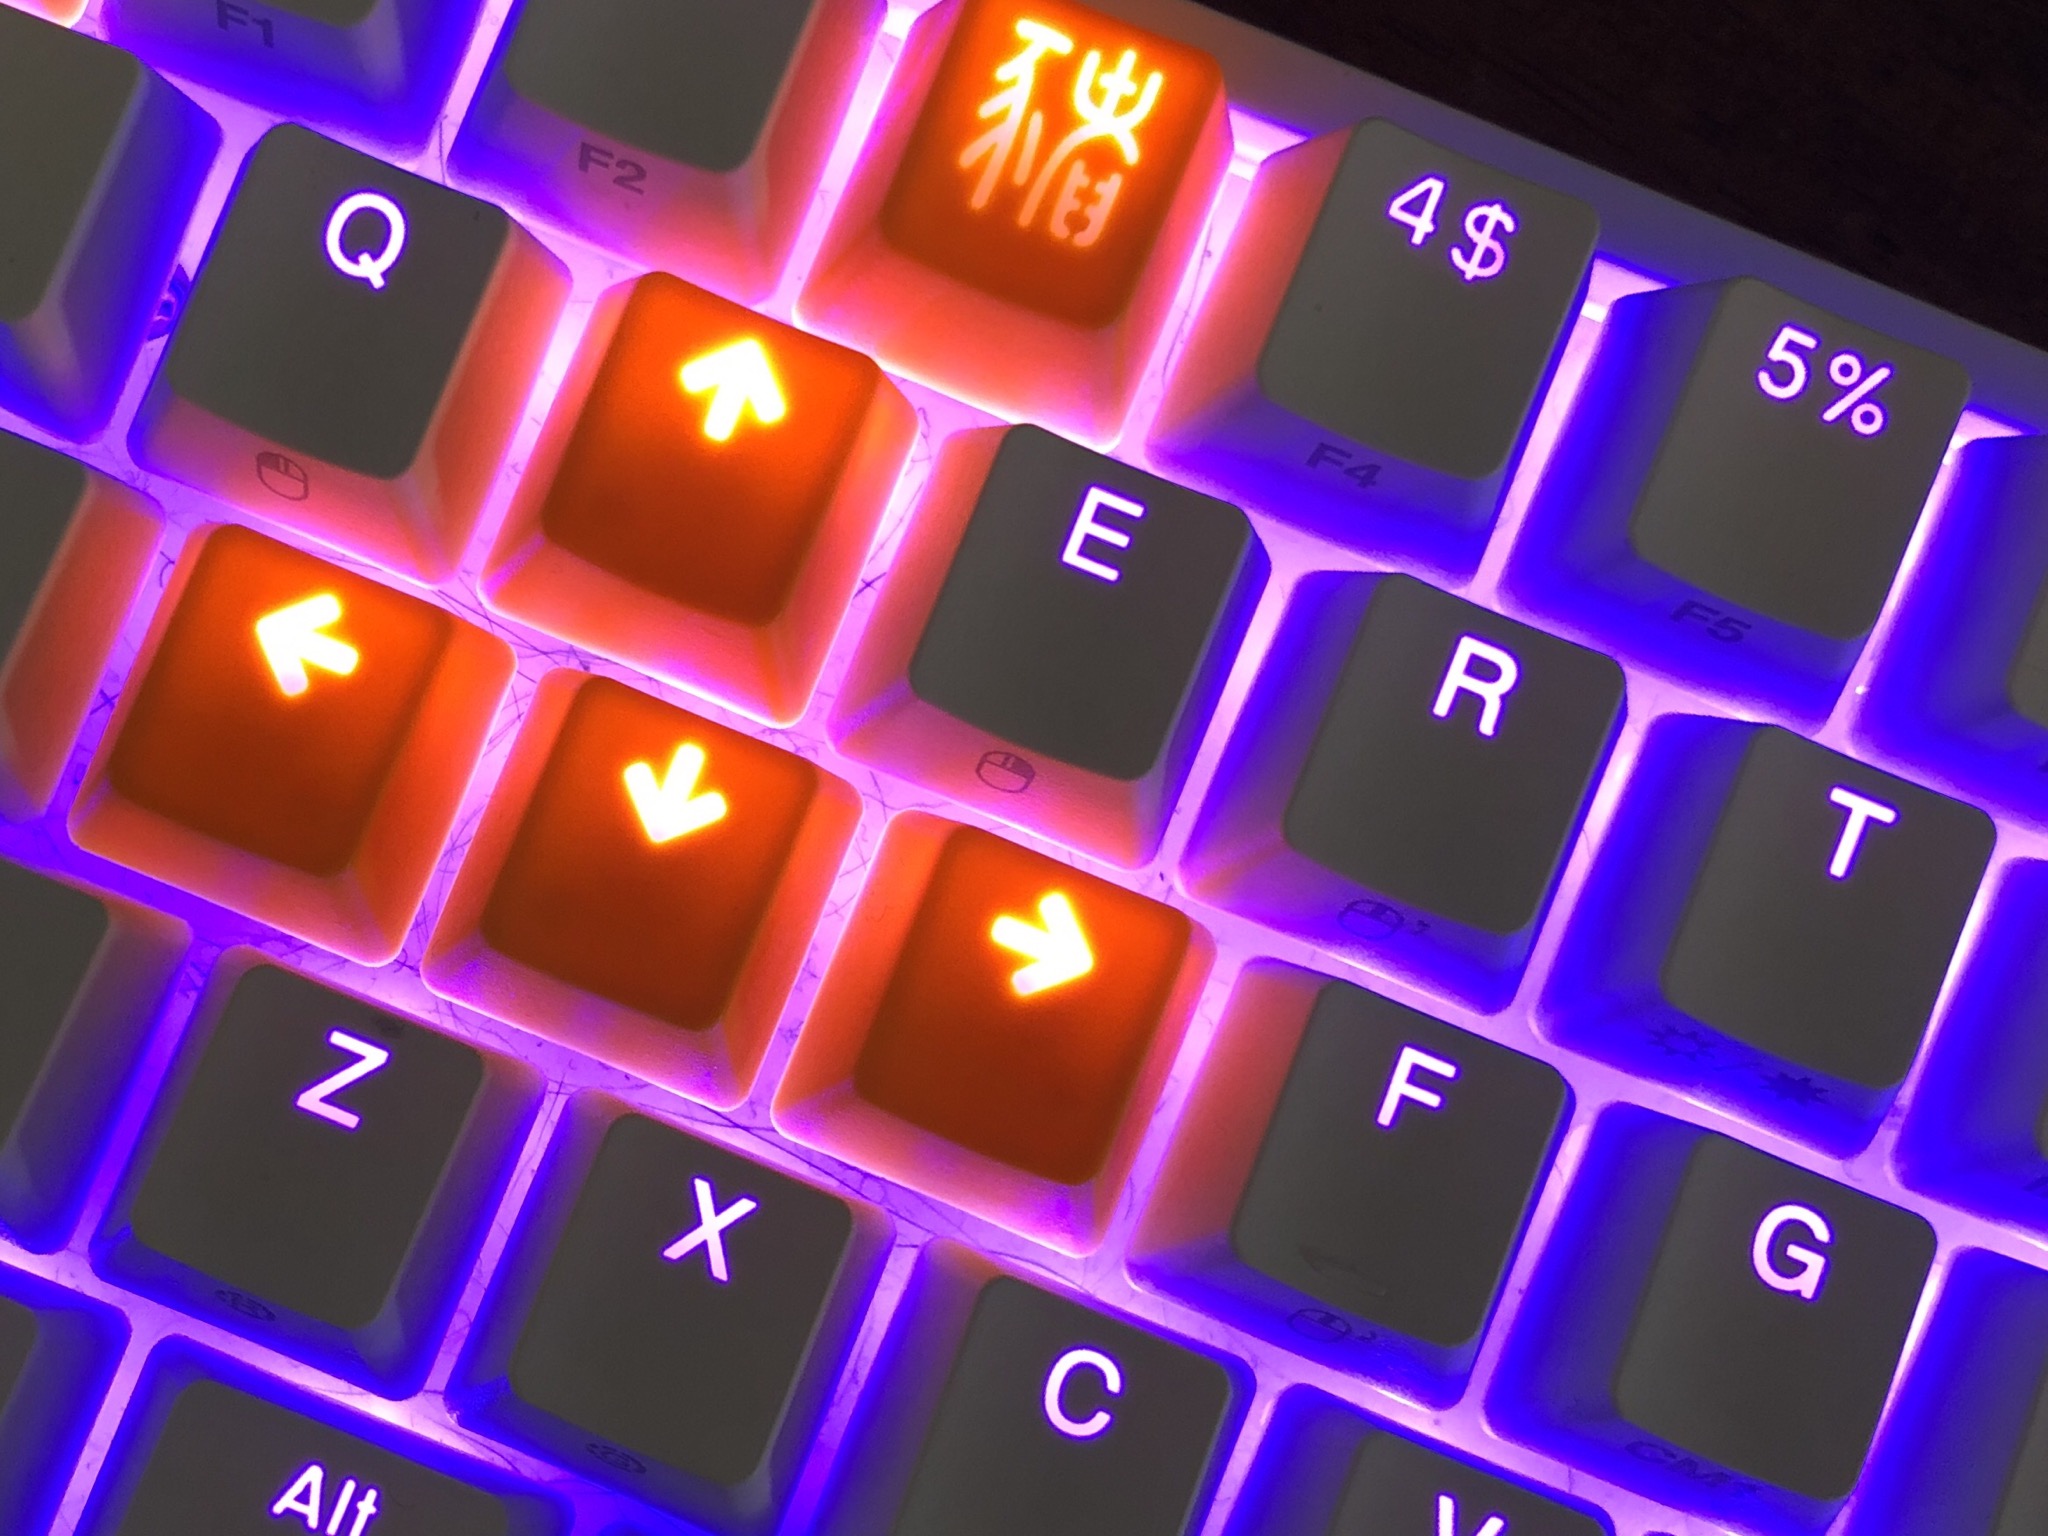 Photo of a keyboard backlit with purple, with several bright orange key caps  